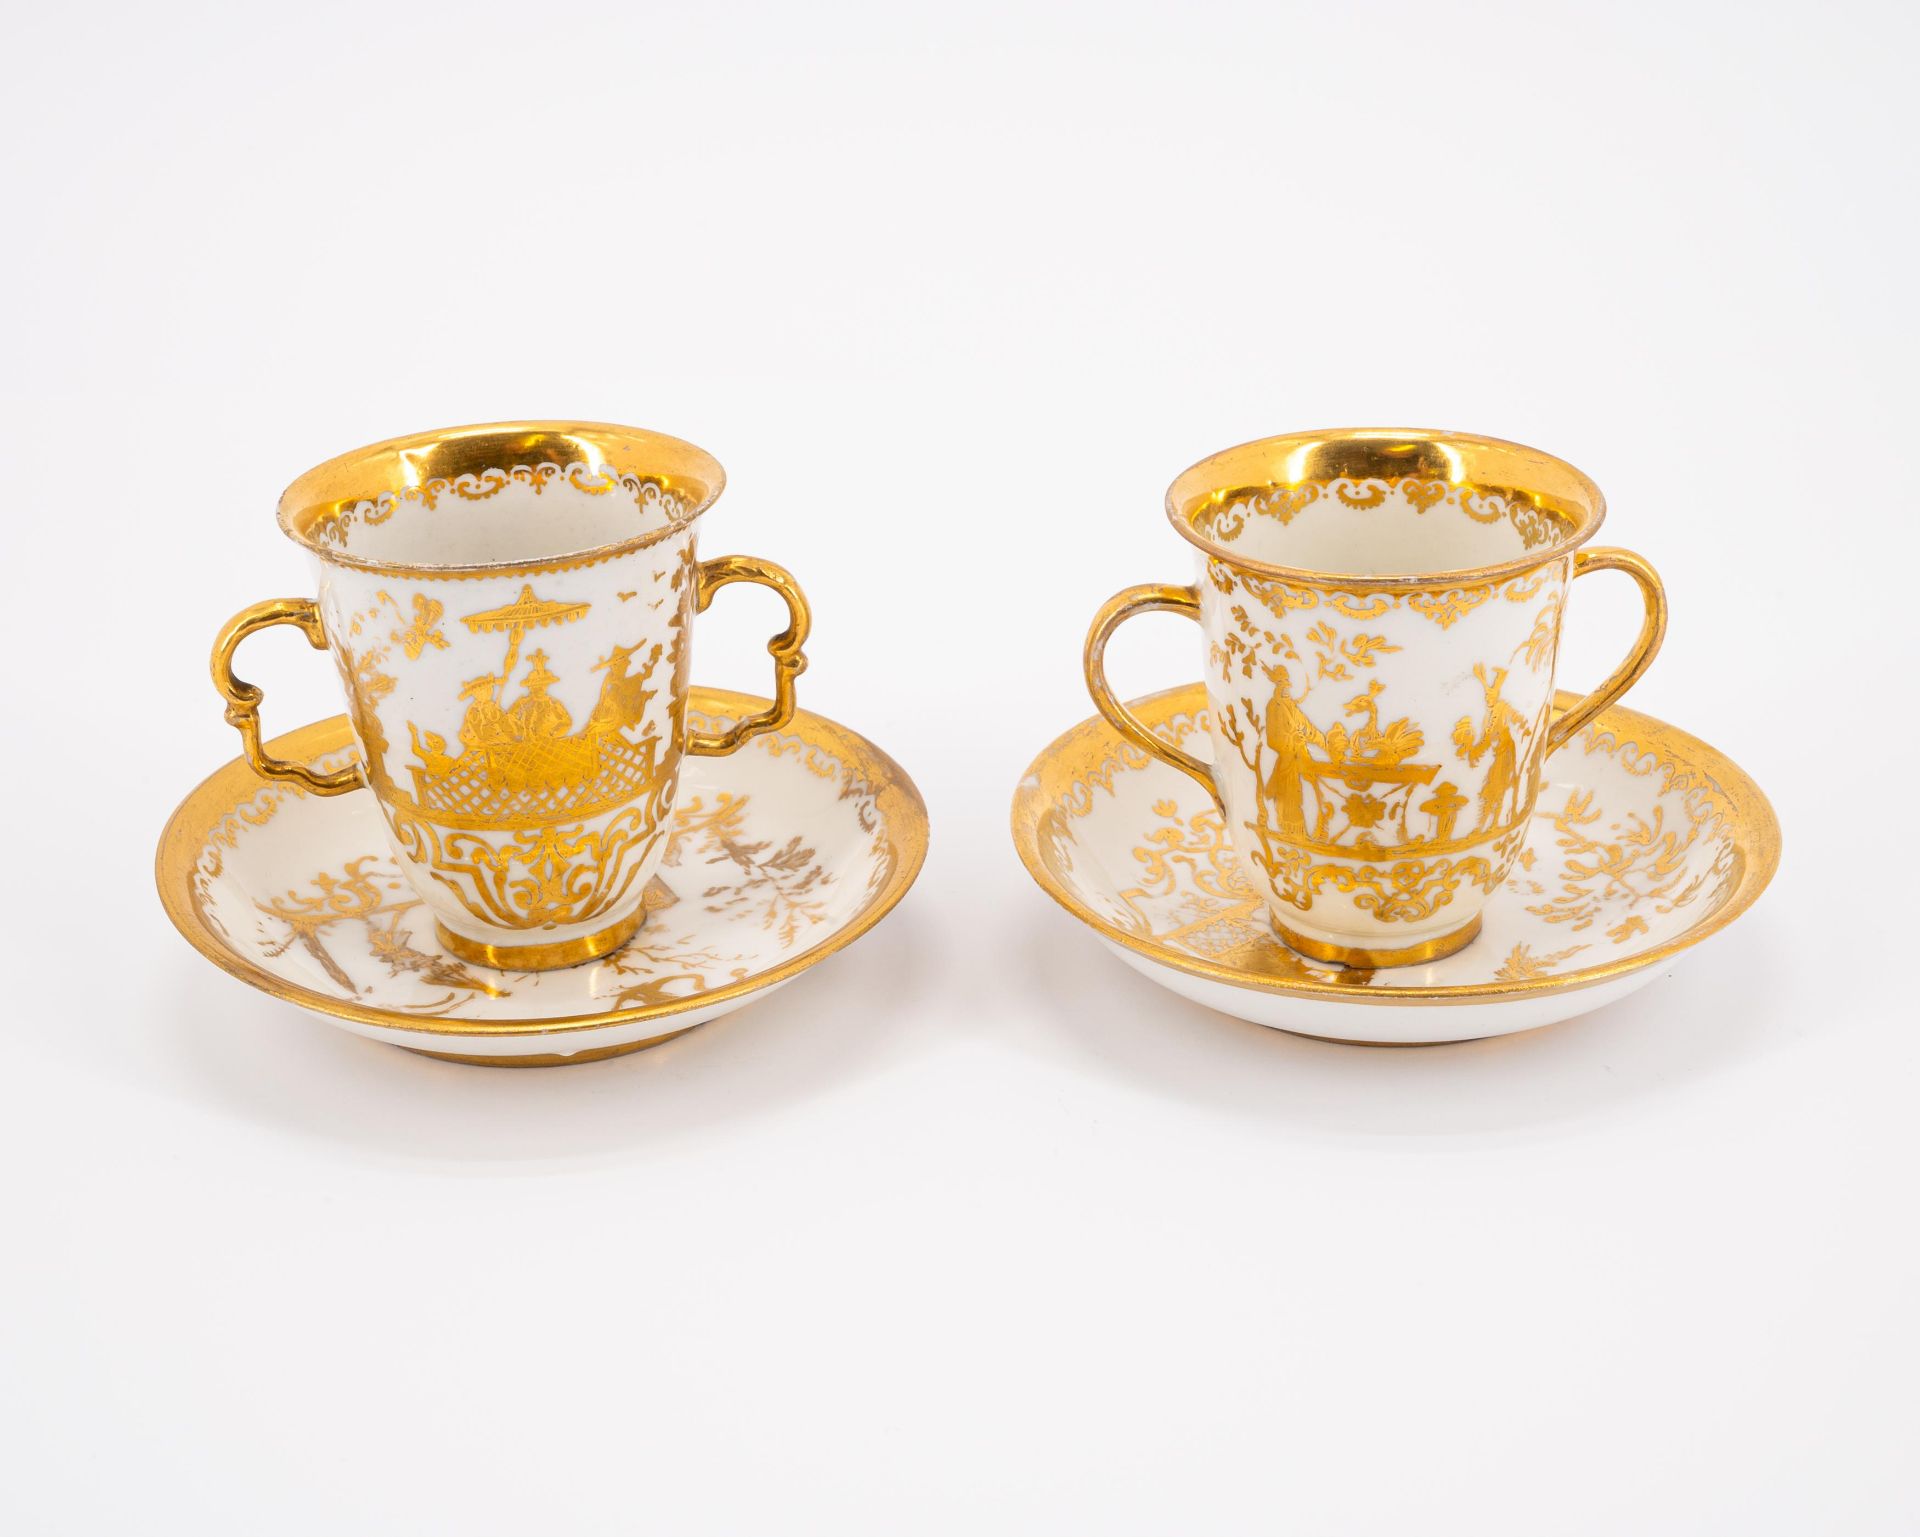 Meissen: TWO PORCELAIN BEAKERS WITH DOUBLE HANDLE AND SAUCERS WITH GOLDEN CHINOISERIES - Image 3 of 6